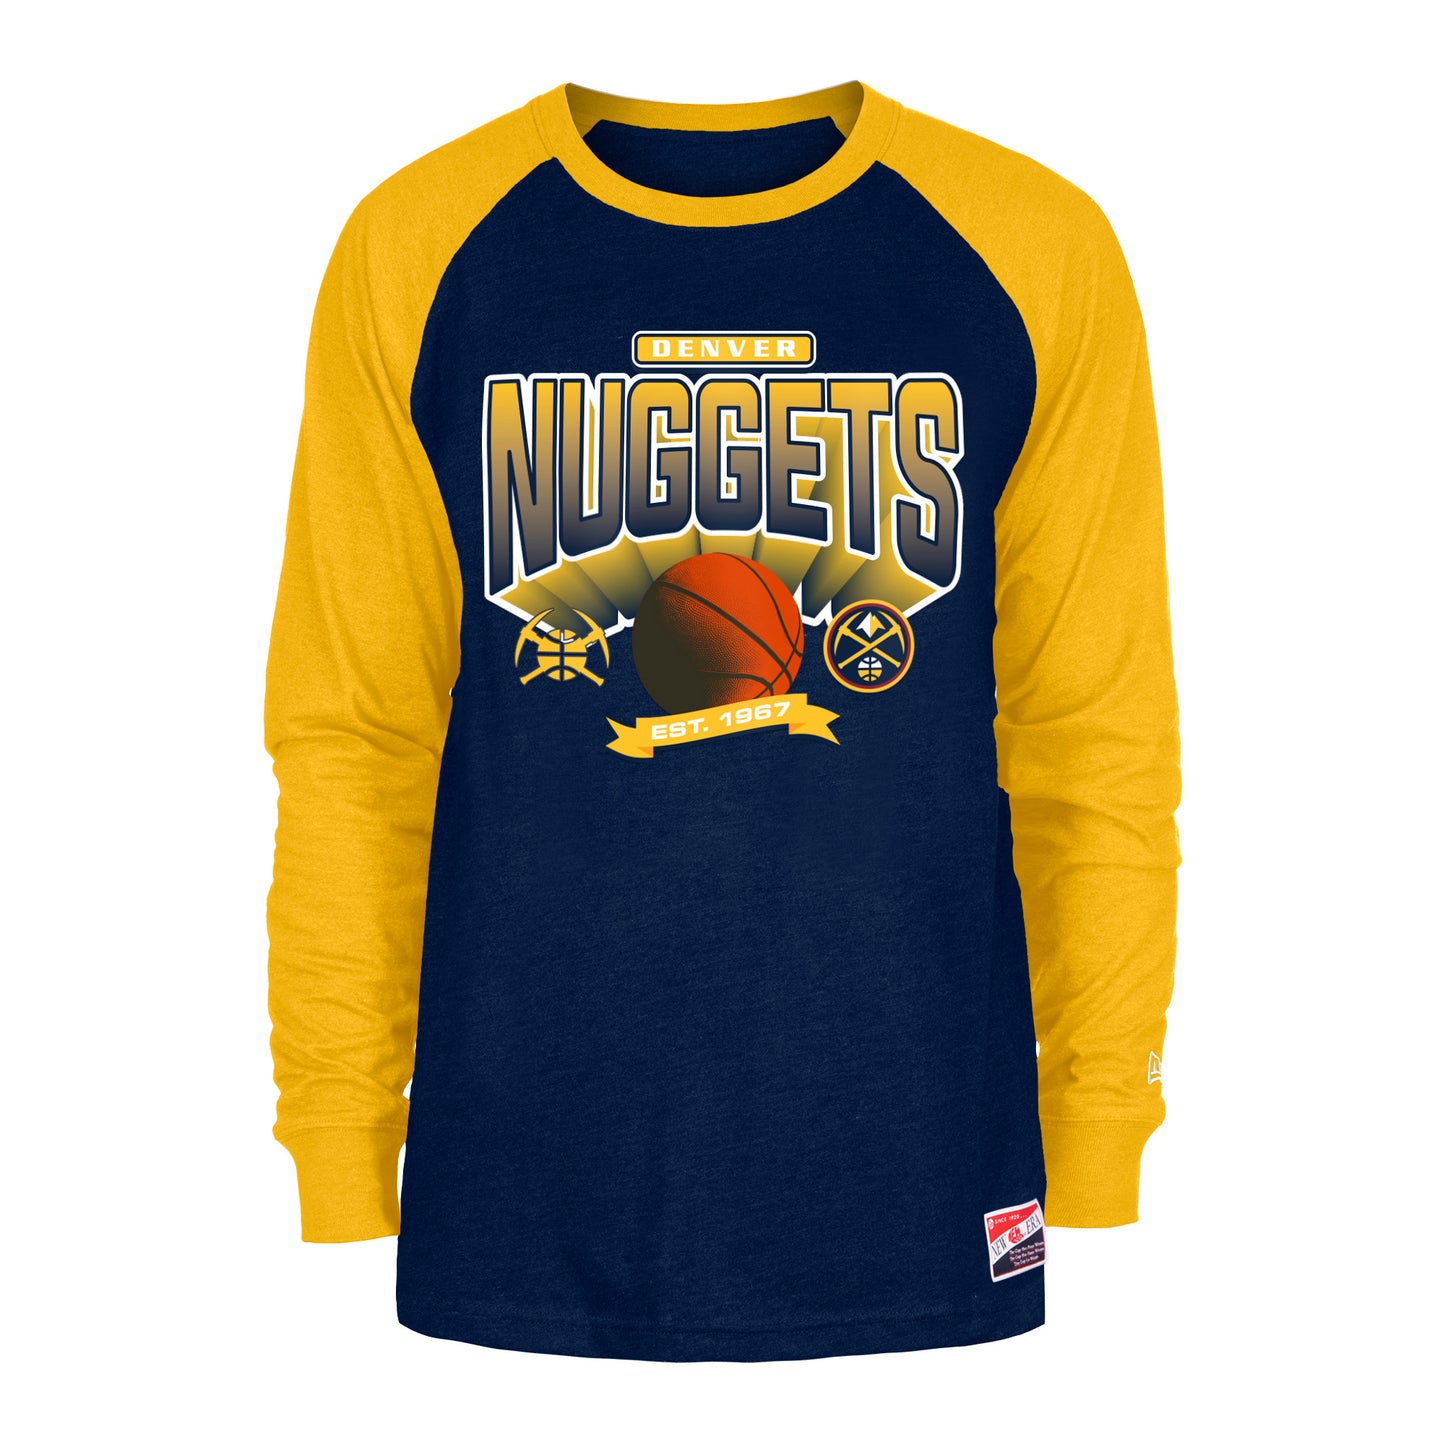 Nuggets L/S Throwback Tee